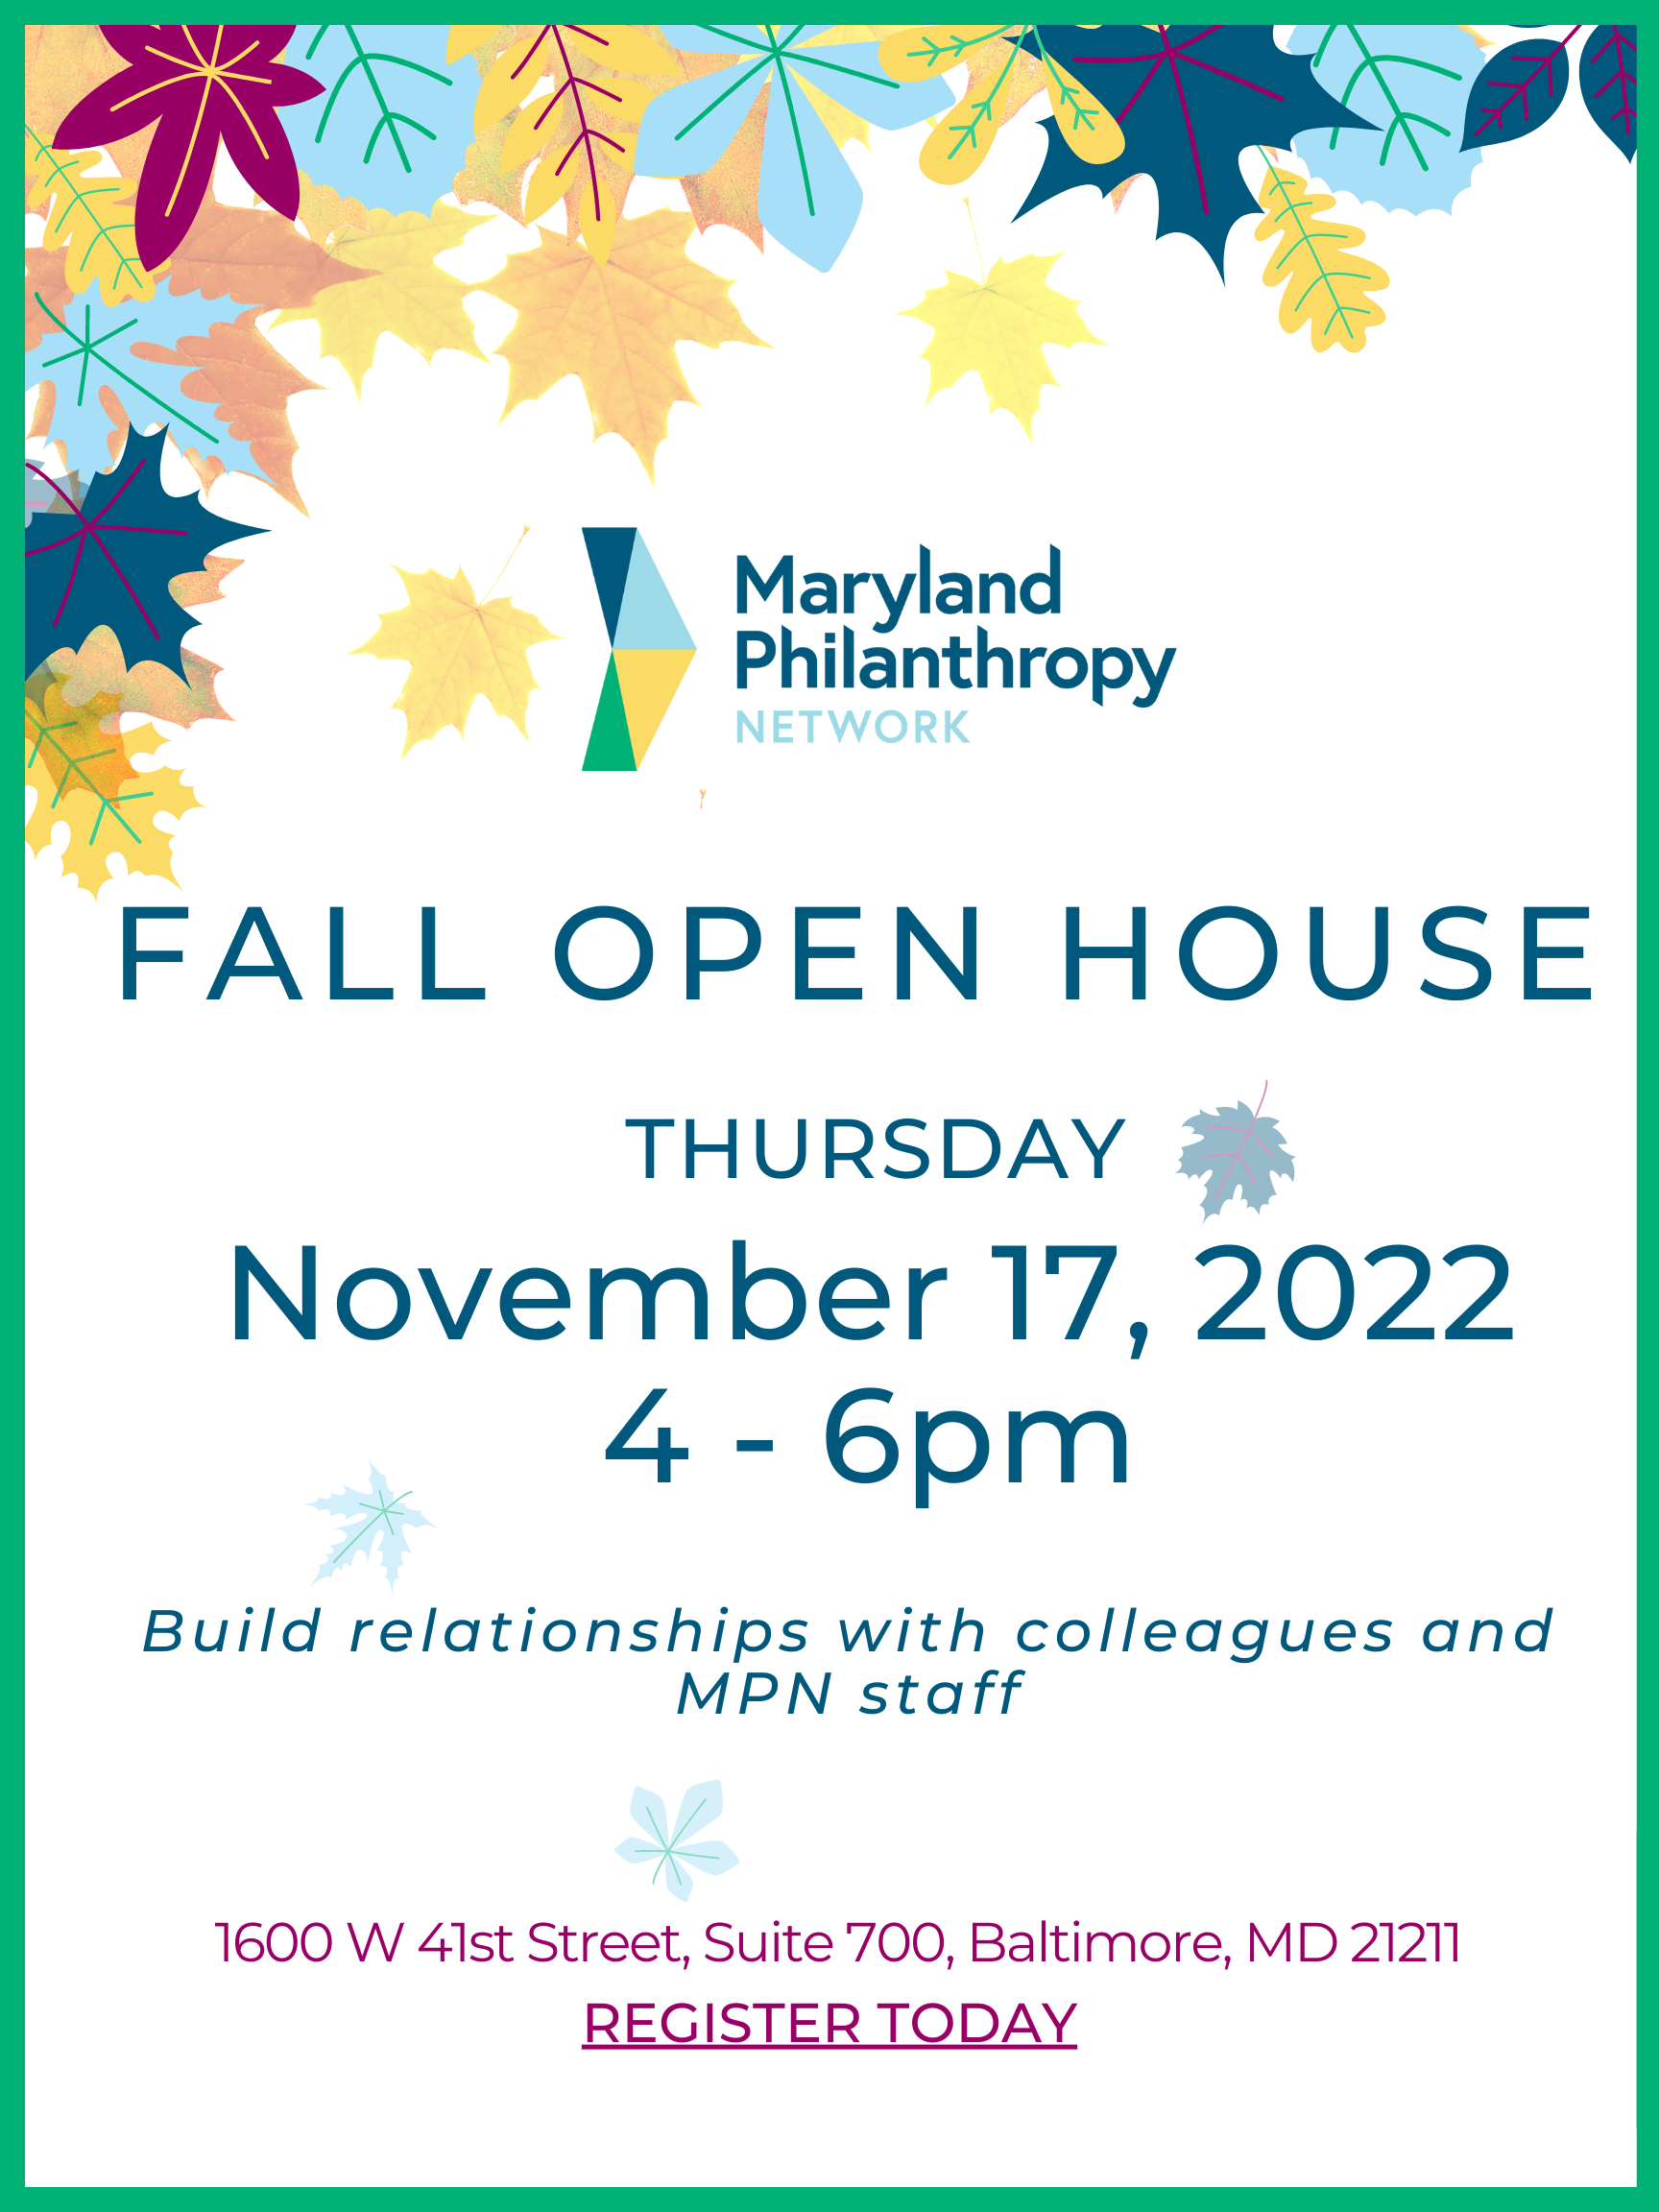 Join Maryland Philanthropy Network for a Fall Open House on Thursday, November 17, 2022 from 4-6 PM to build relationships with colleagues and MPN staff.